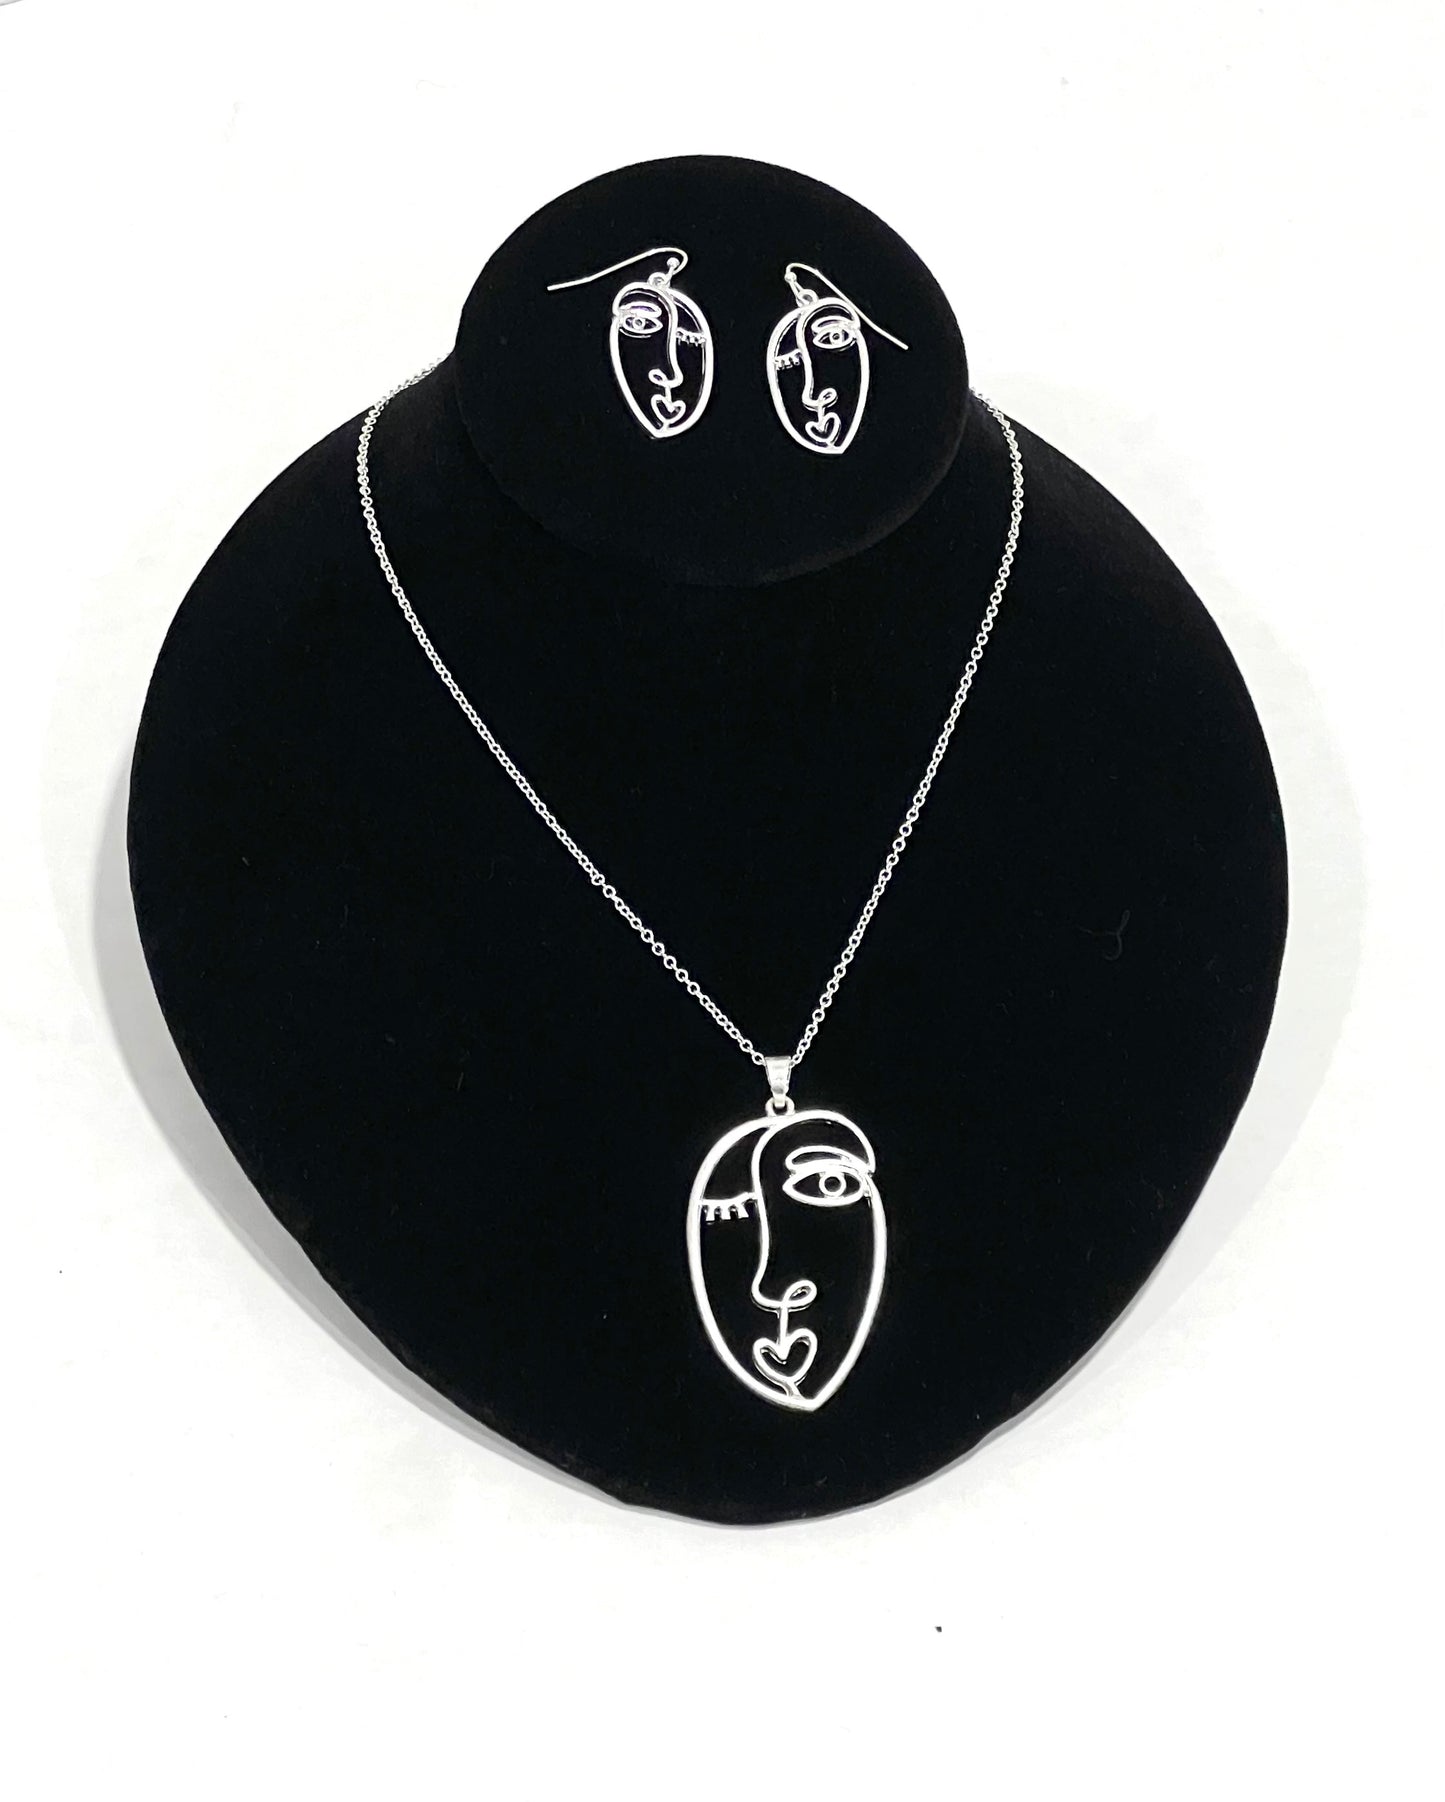 Picasso Face Necklace and Earring Set